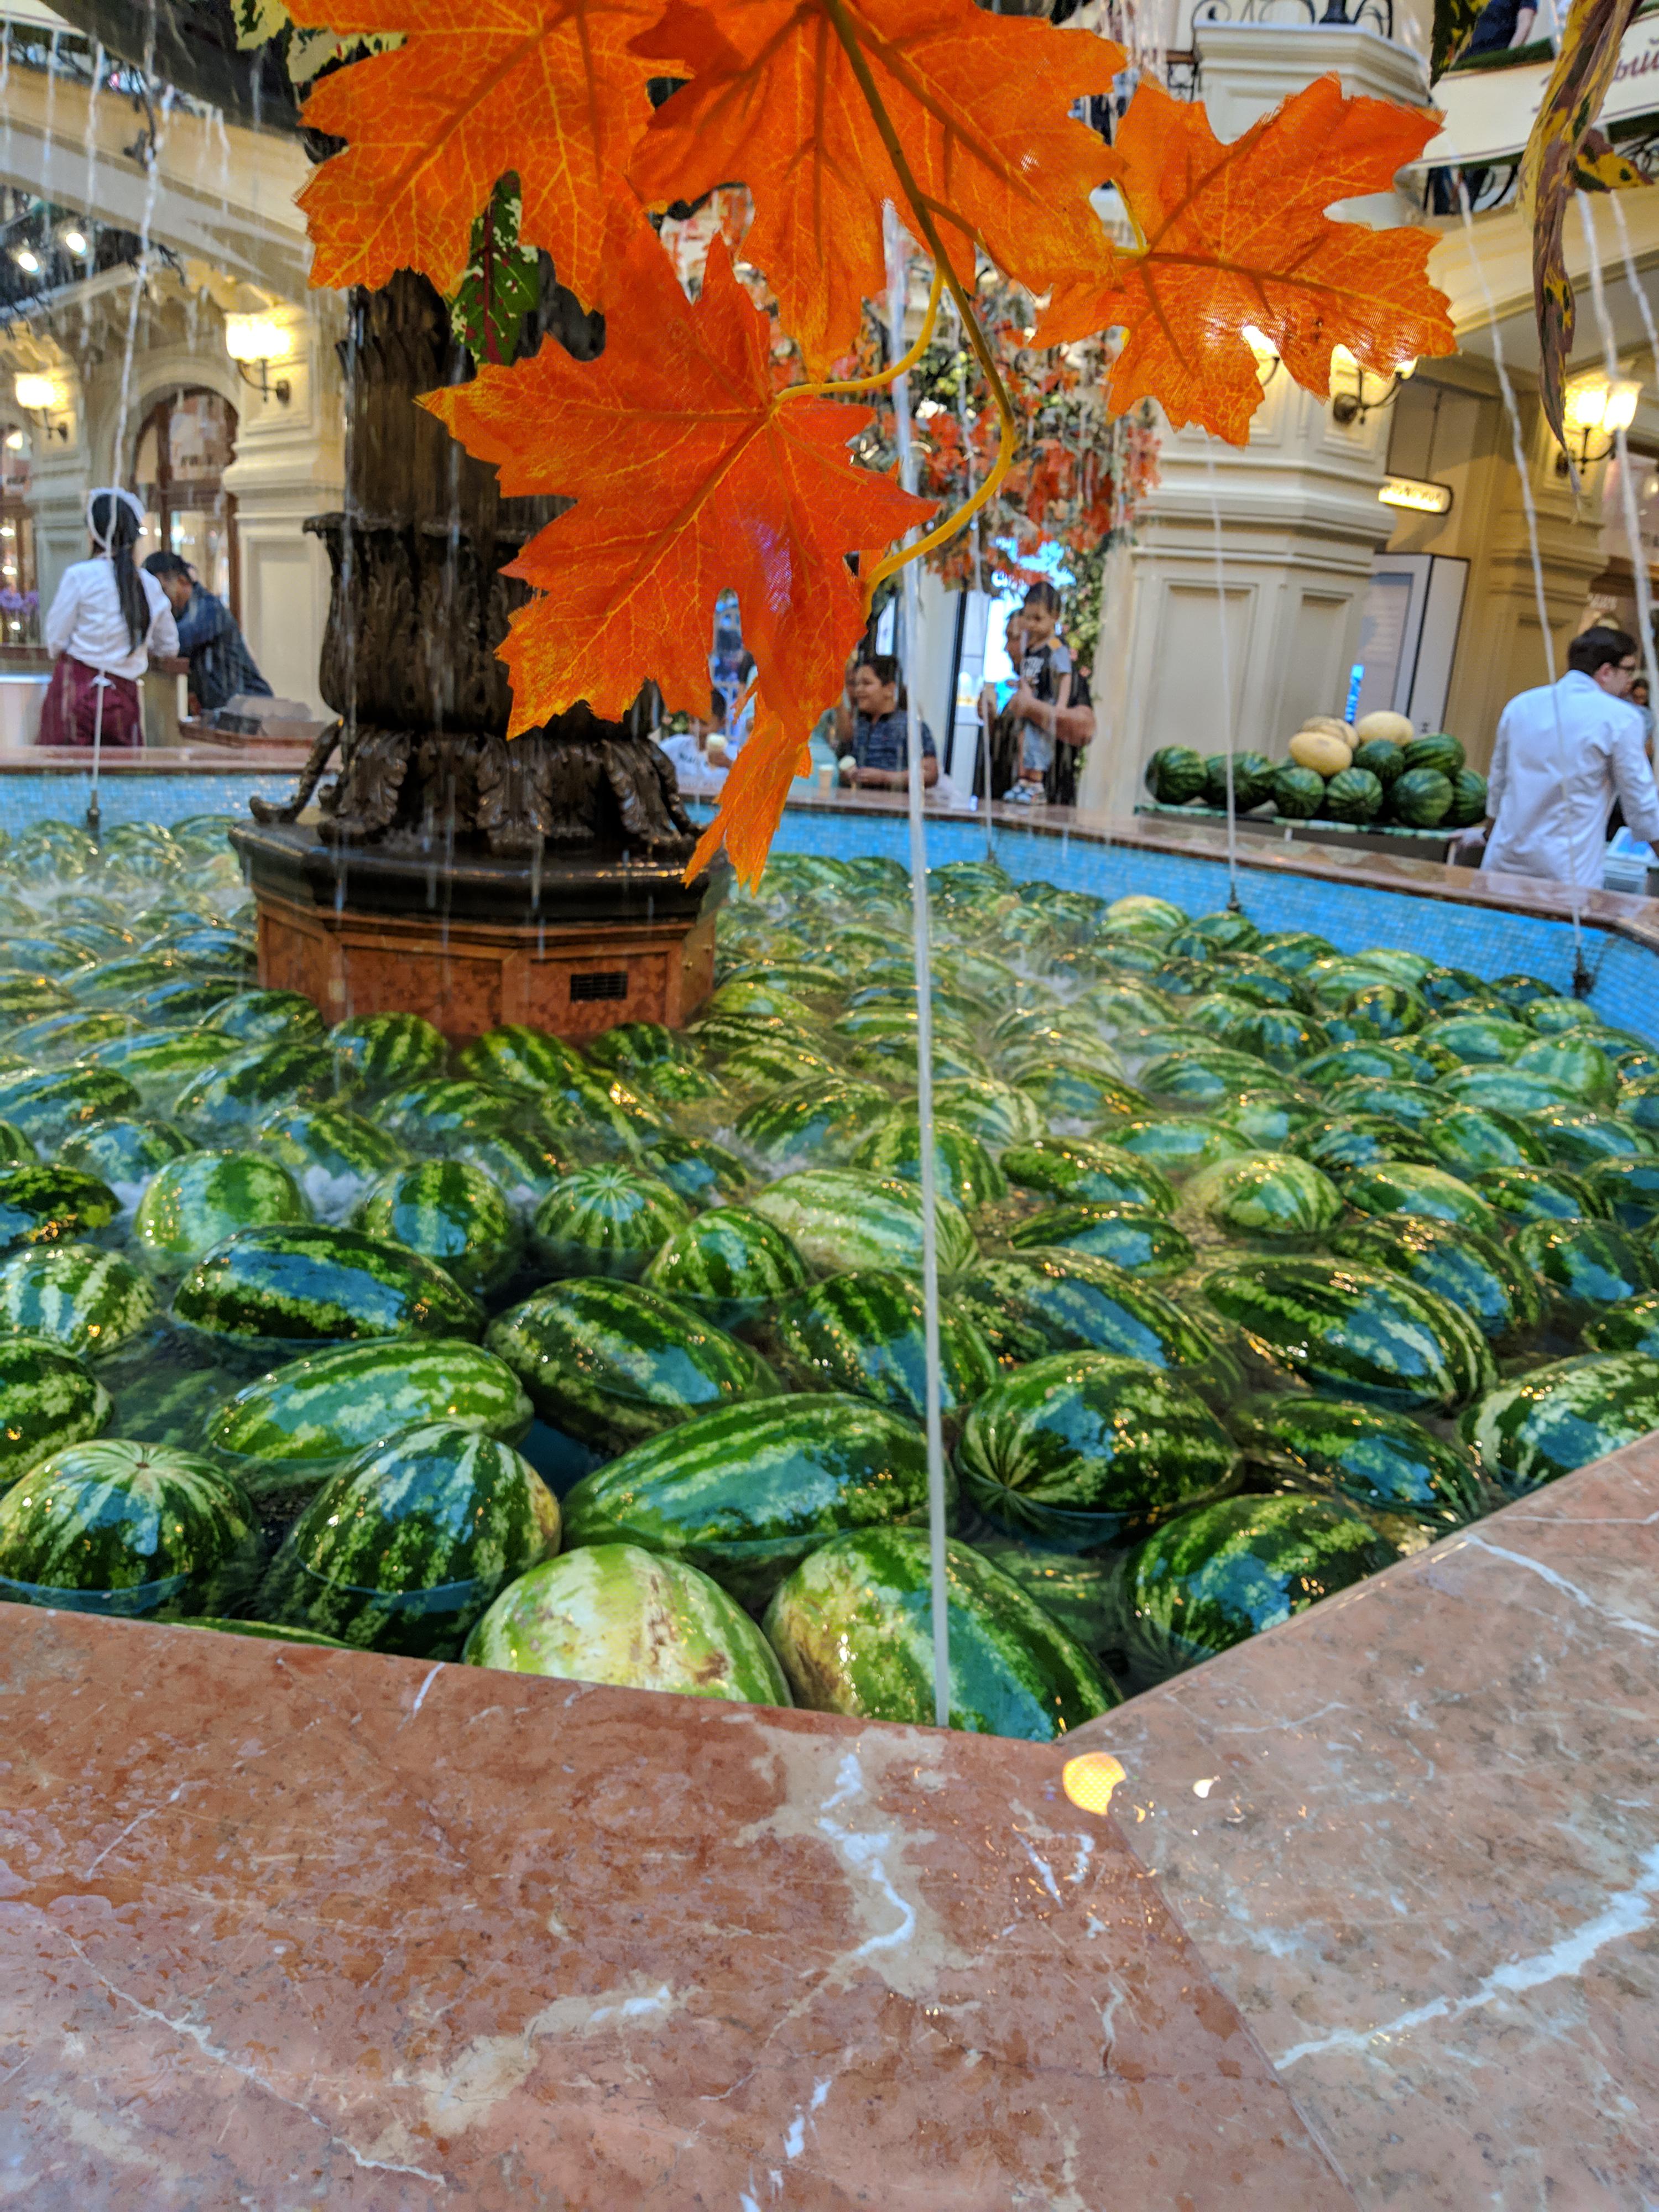 Watermelons in a fountain. | Scrolller